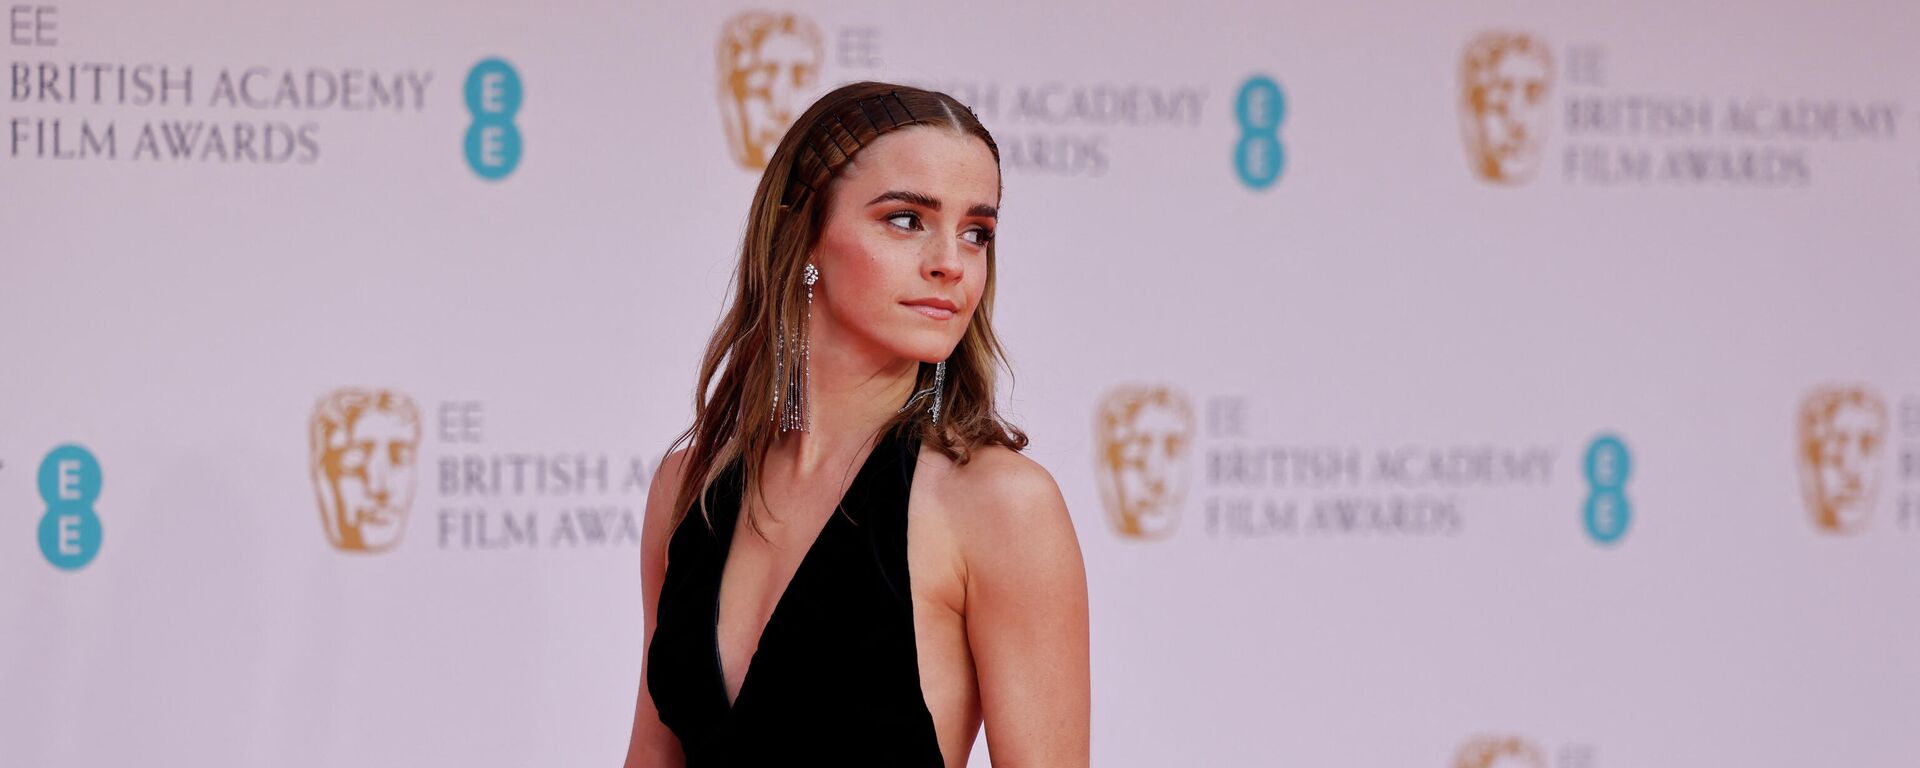 British actress Emma Watson poses on the red carpet upon arrival at the BAFTA British Academy Film Awards at the Royal Albert Hall, in London, on March 13, 2022.  - Sputnik International, 1920, 14.03.2022